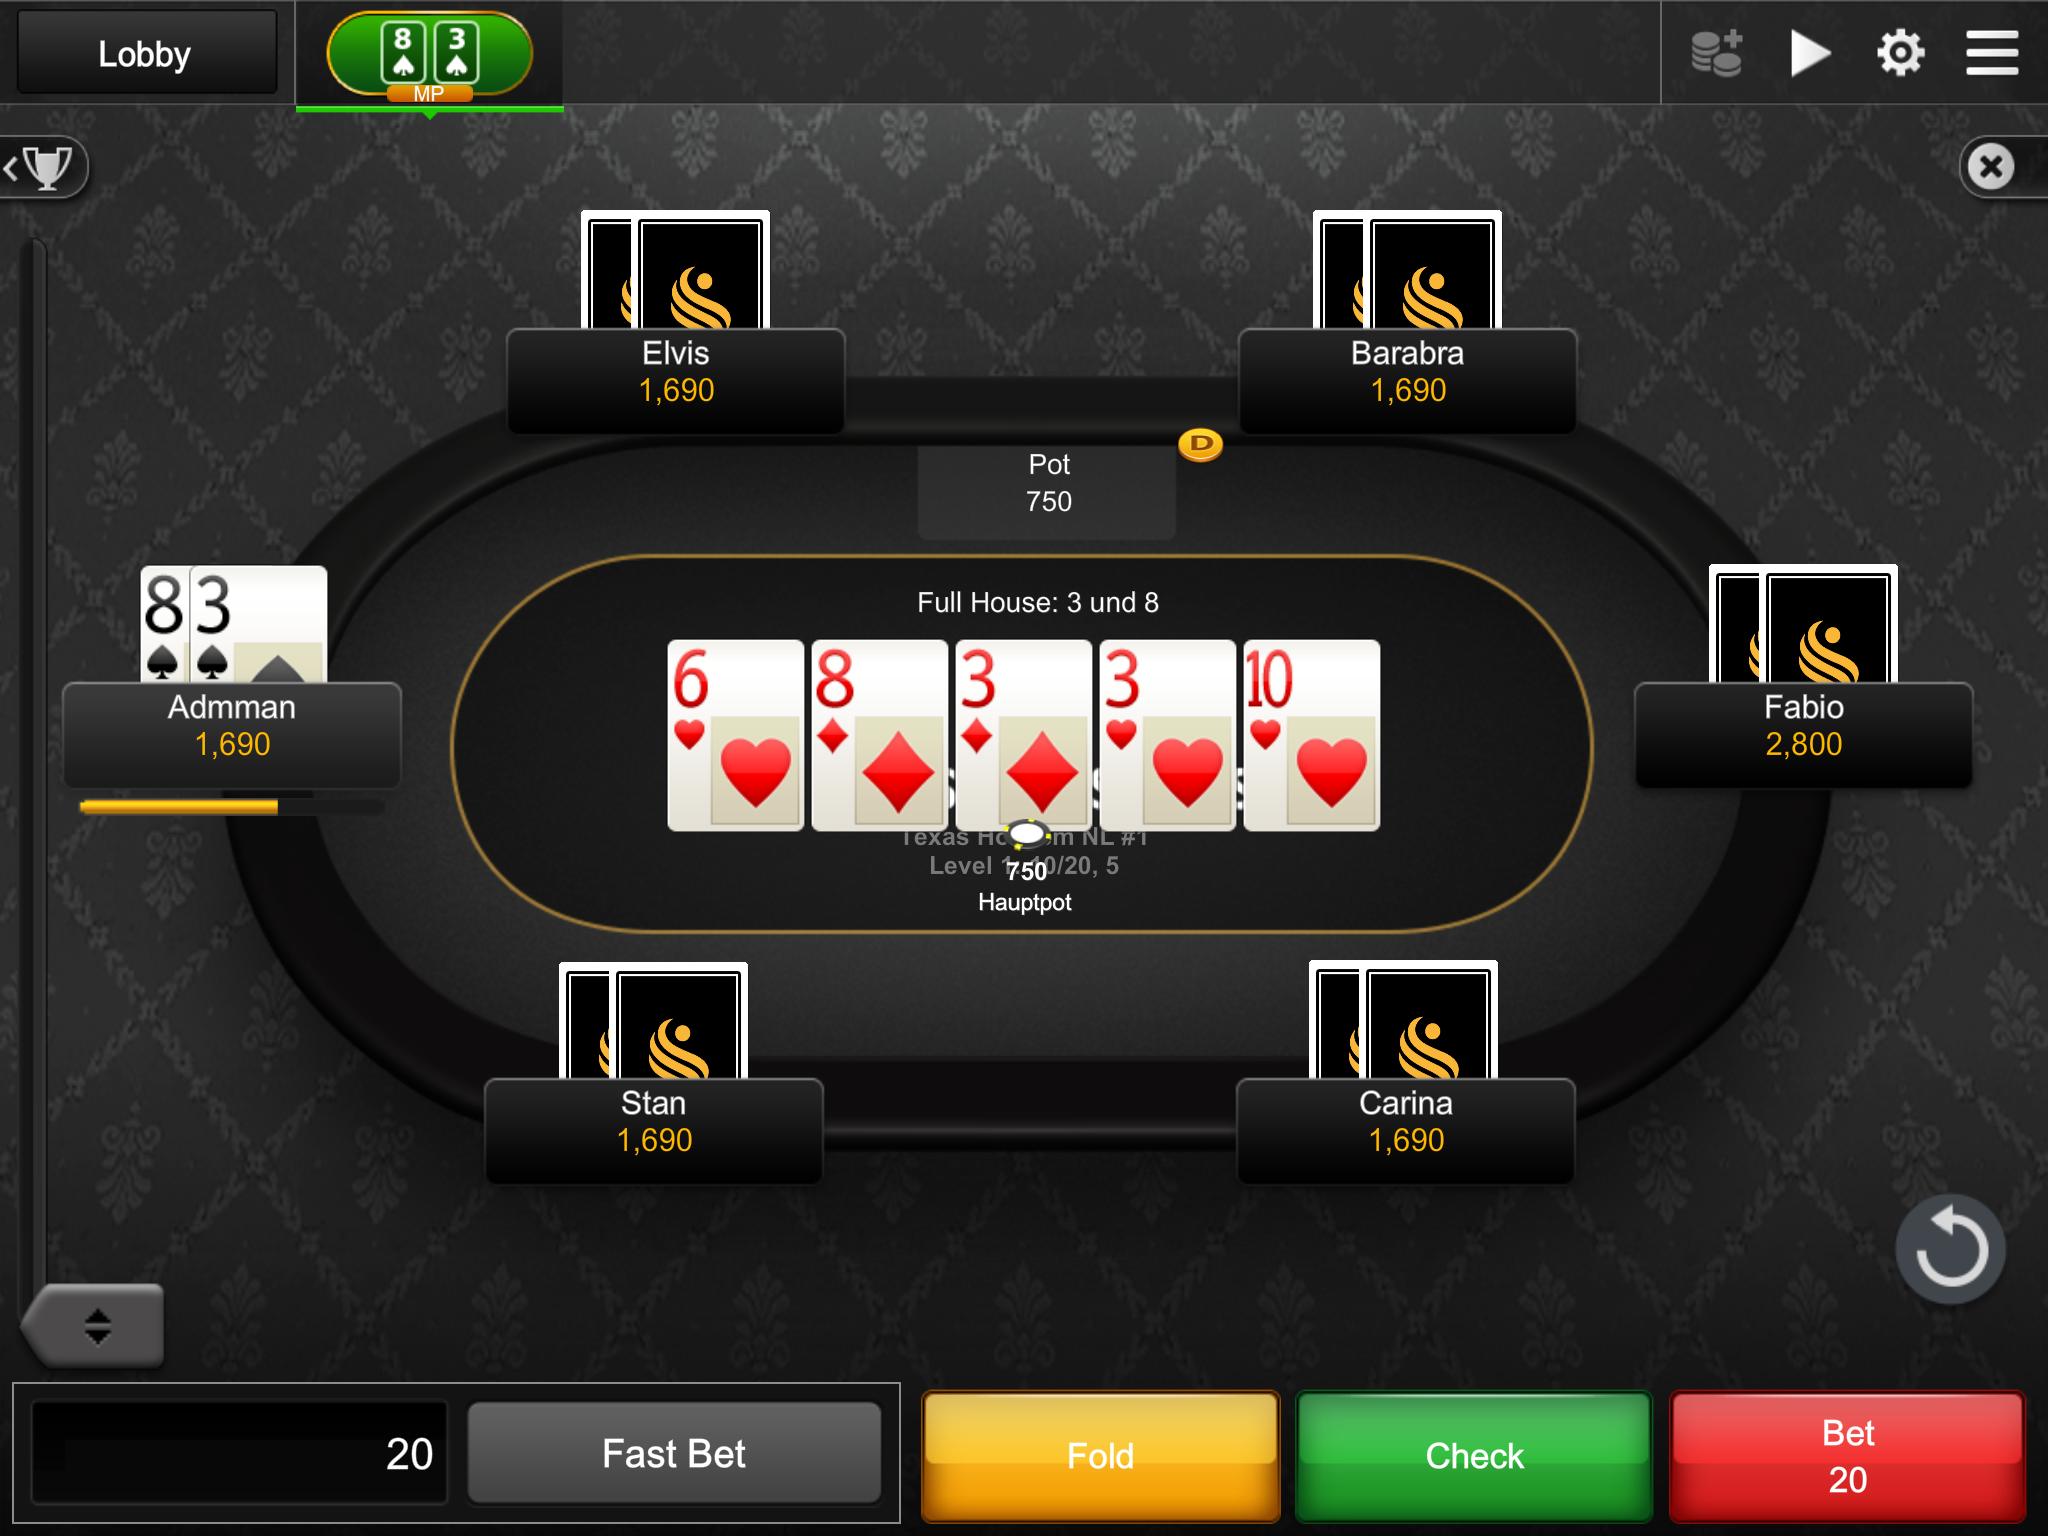 Swiss Casinos Poker for Android - APK Download